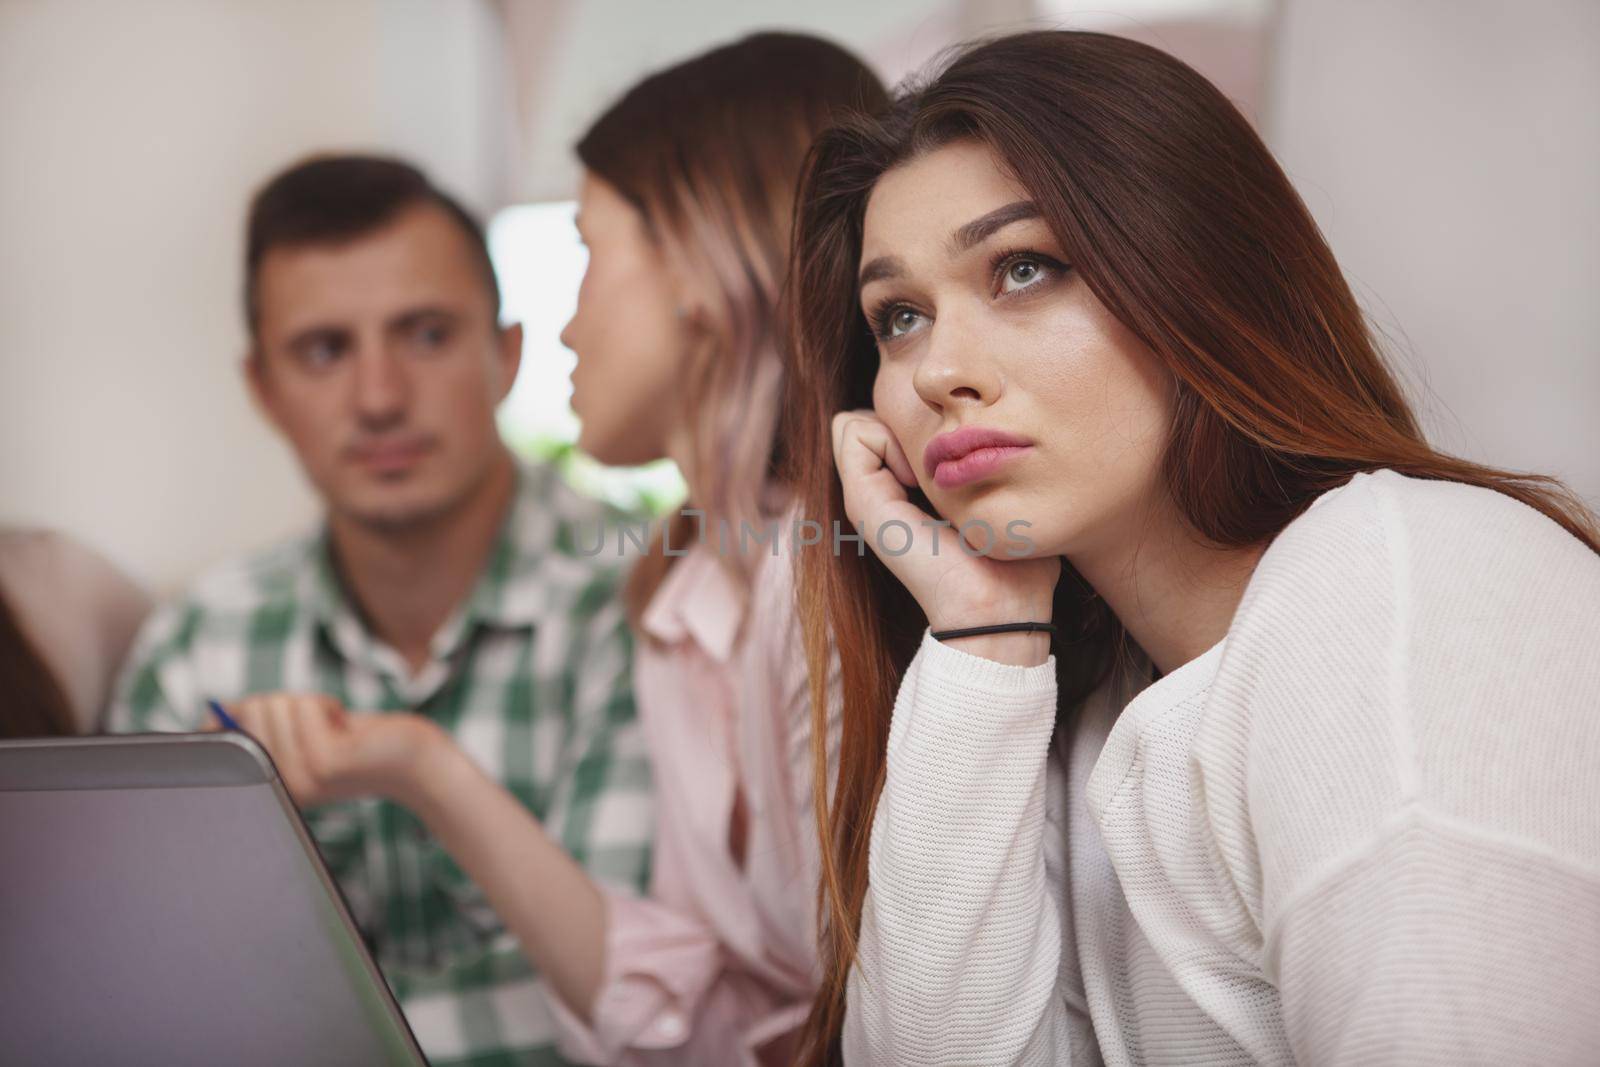 Overworking, boredom concept. Close up of a beautiful female college student looking bored during class. Attractive young woman student looking tired of studying